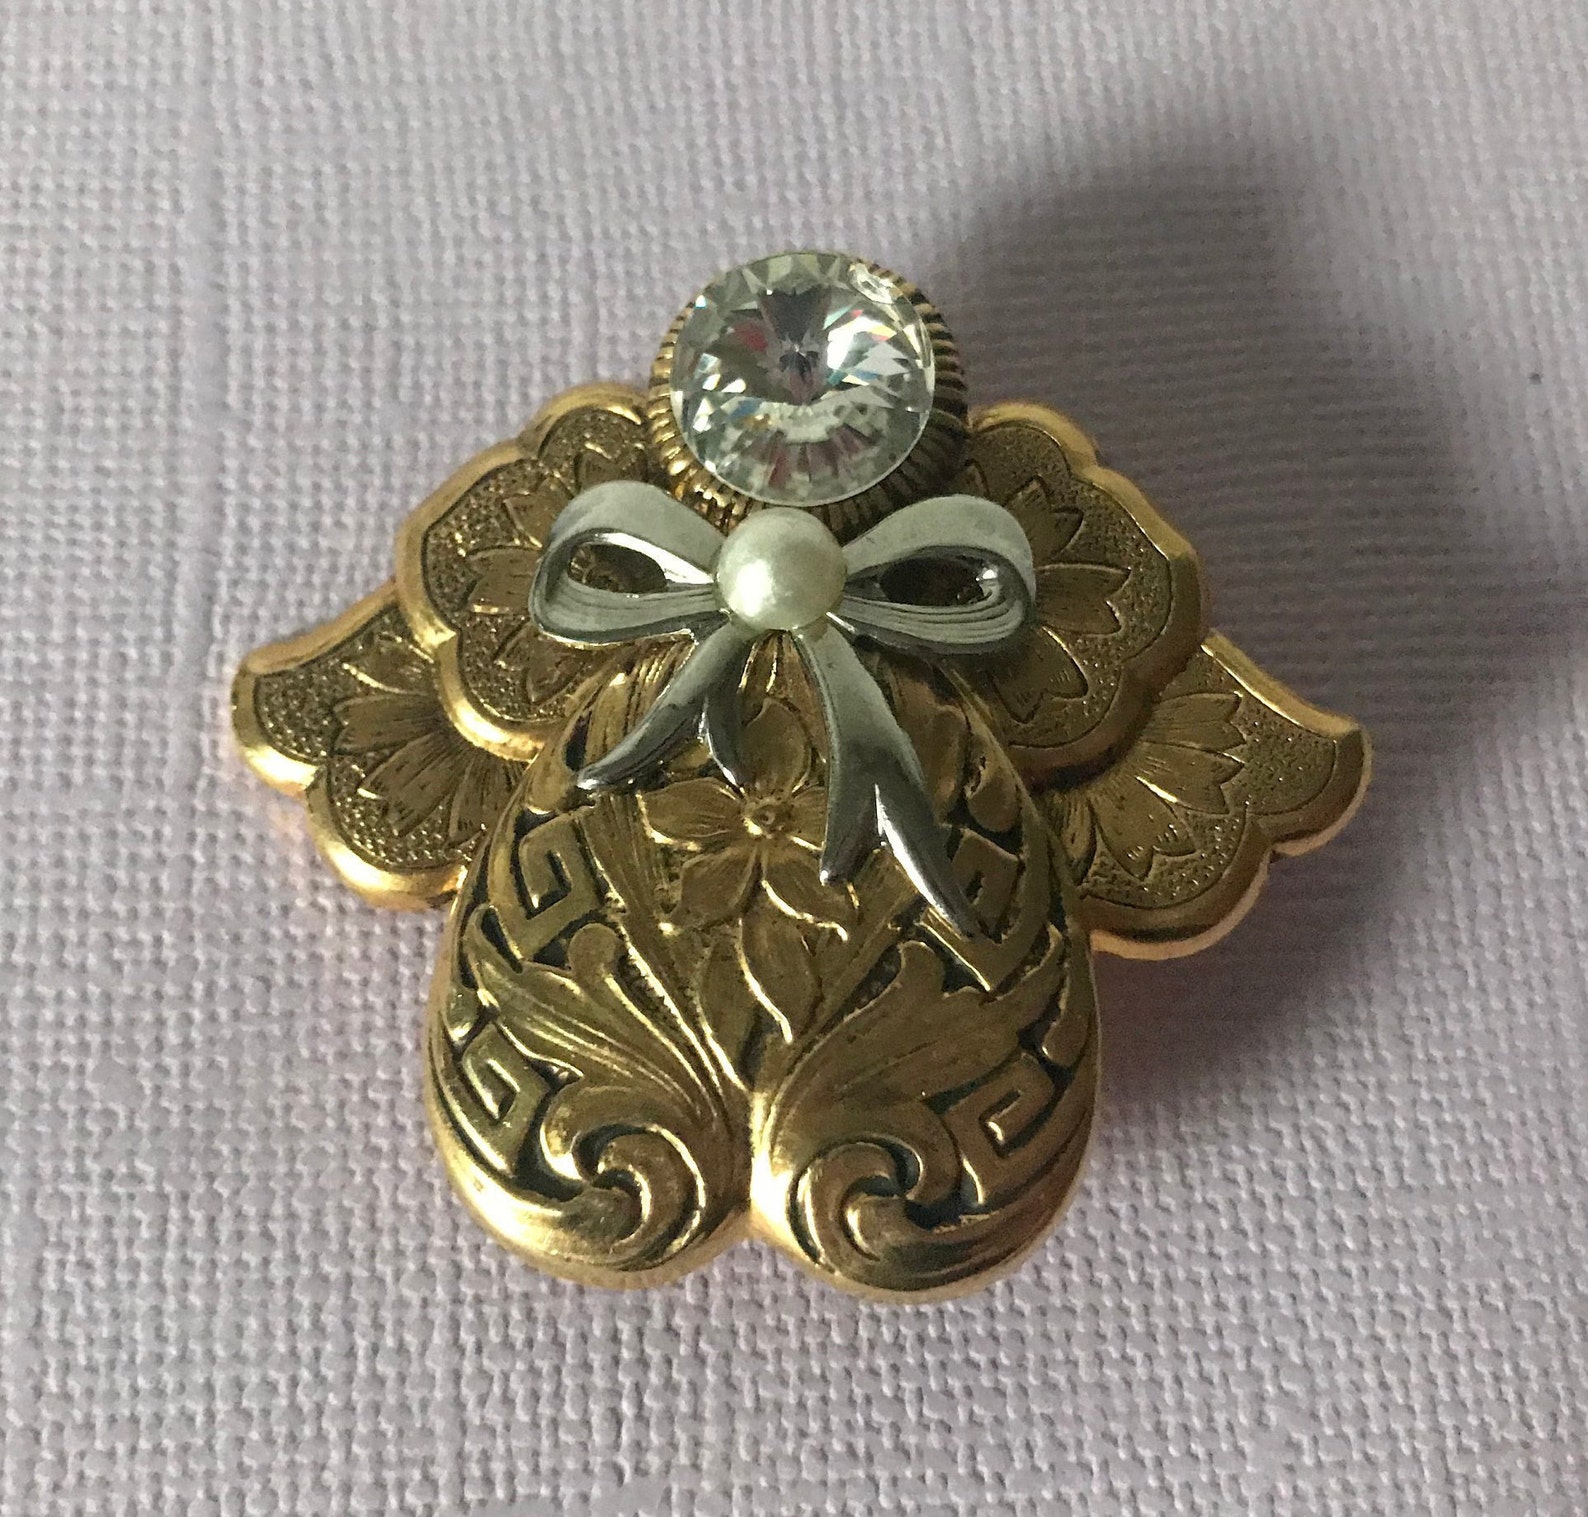 Vintage gold and silver angel pin rhinestone angel pin | Etsy